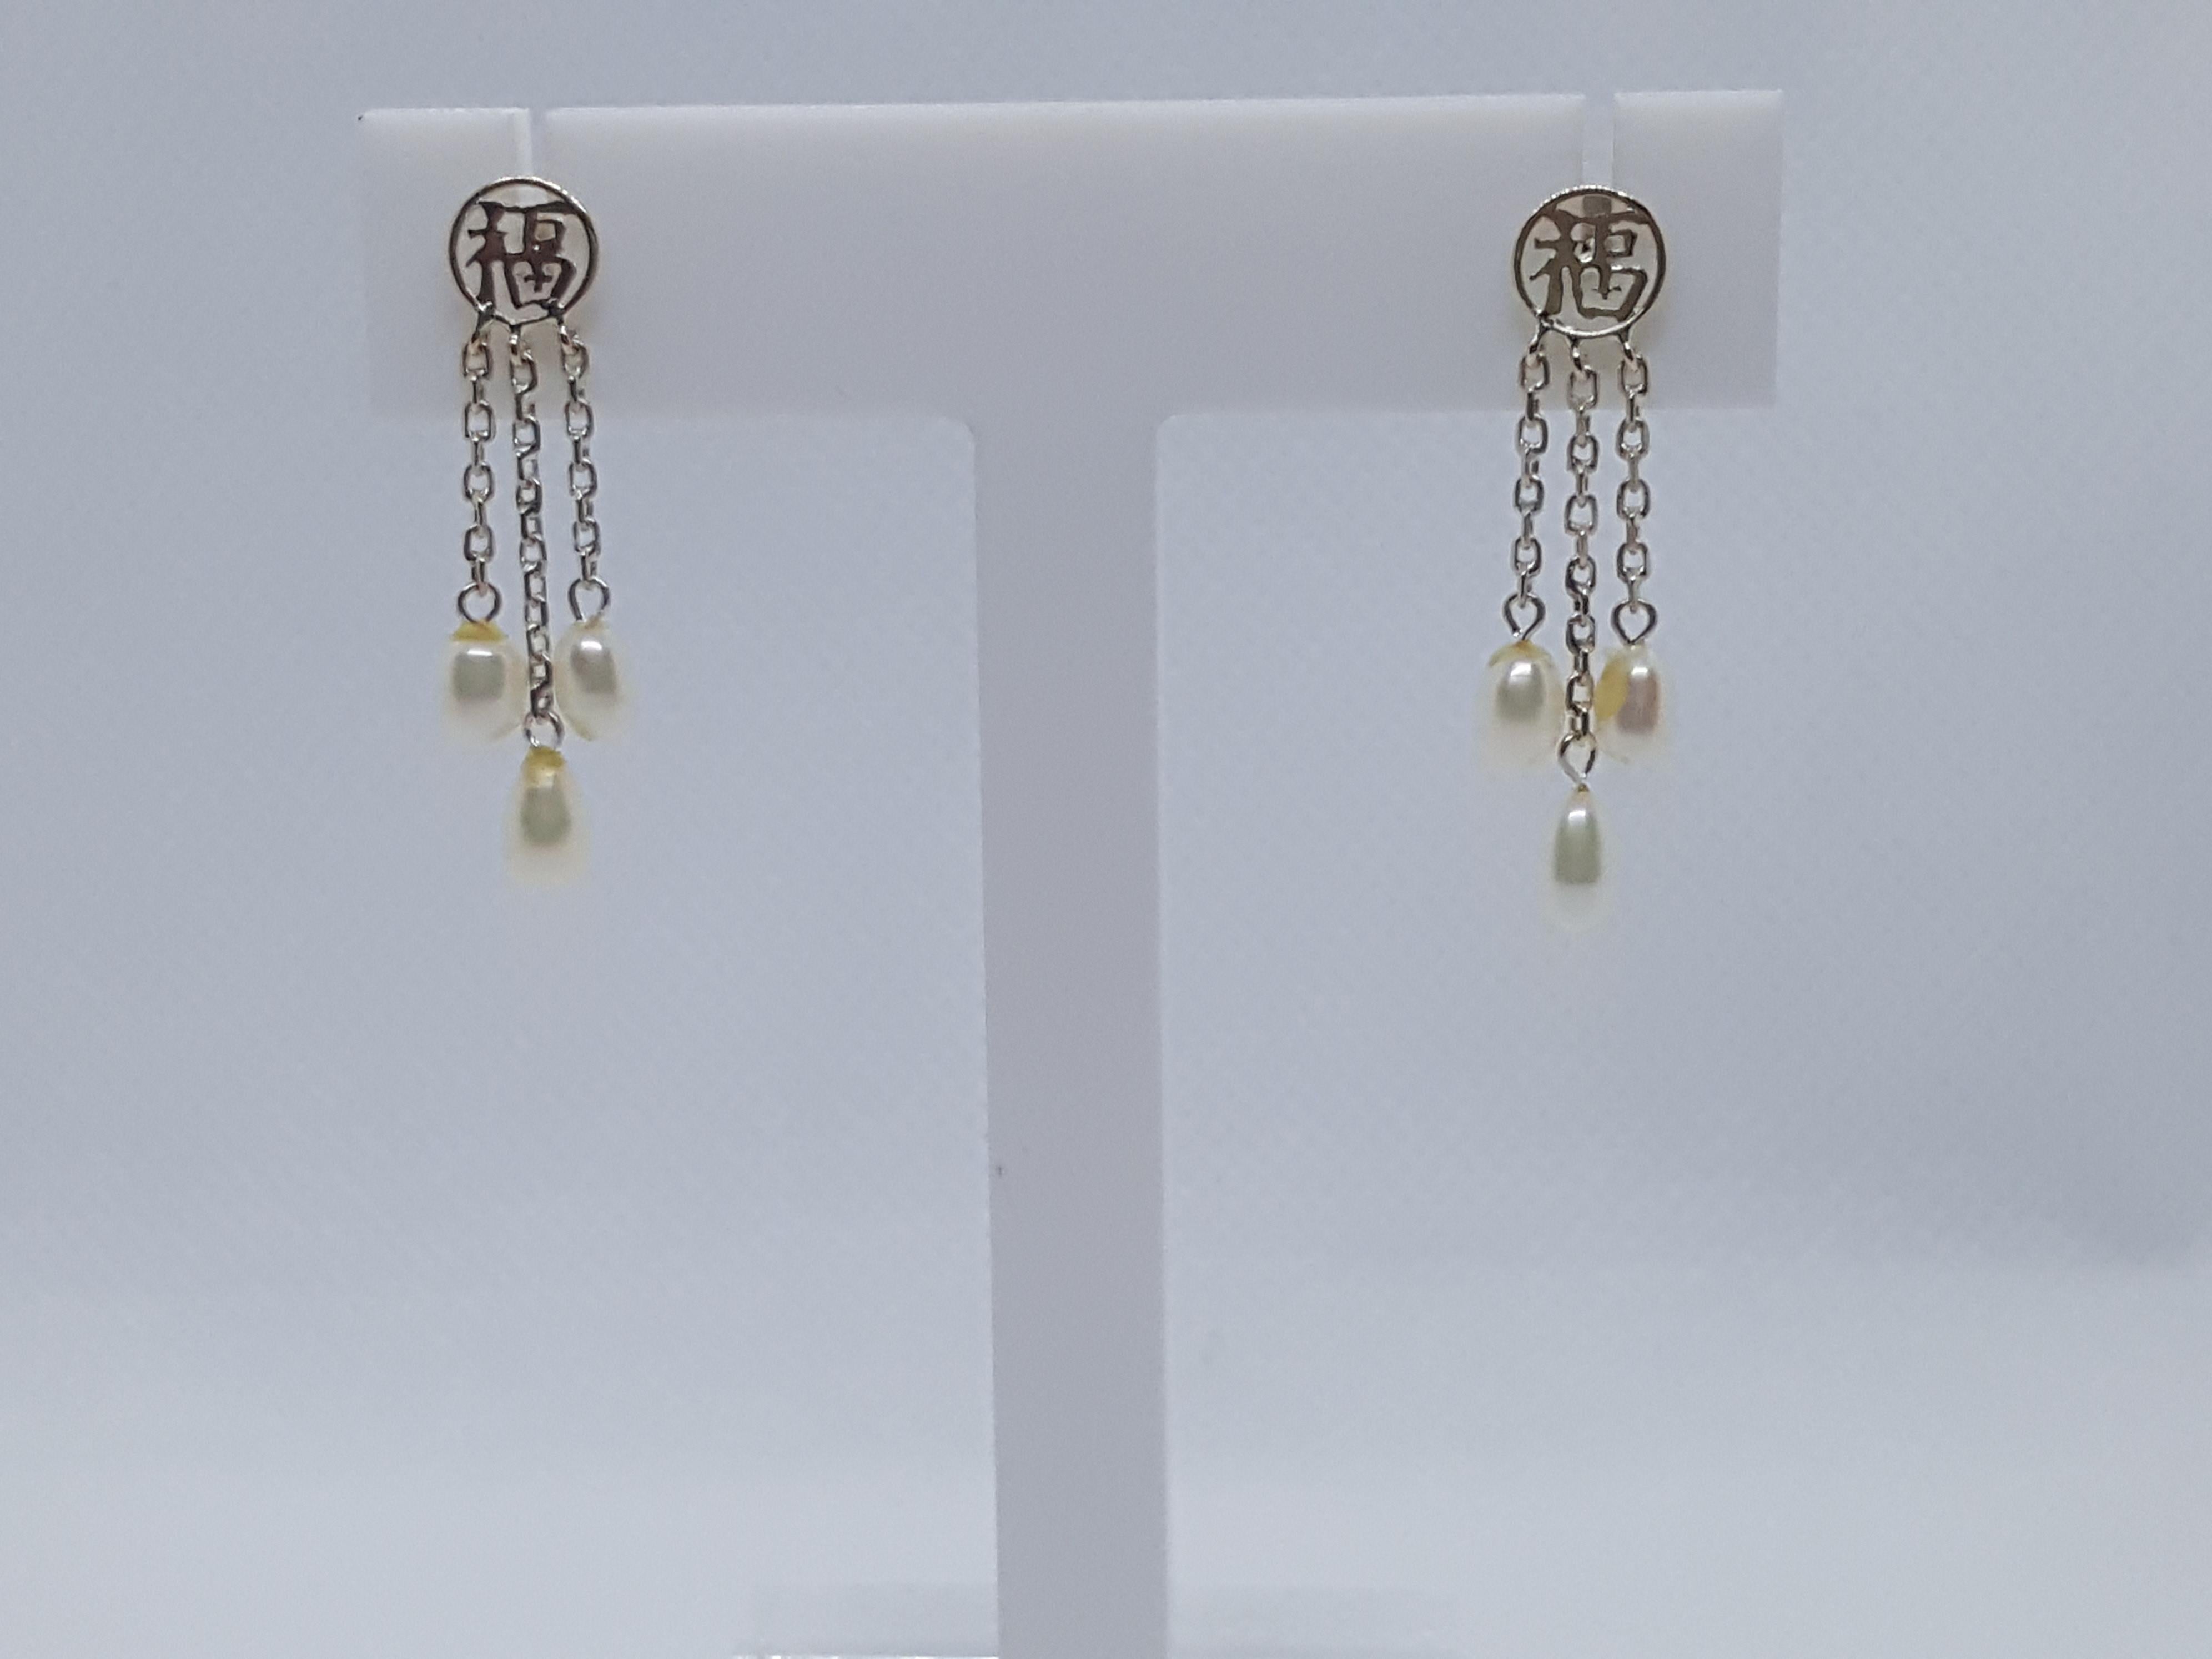 Unique pair of 14kt white gold friction post earrings with a round Asian design that's 6.7mm in diameter from which three graduated strands of link chain hold oval-shaped fine freshwater pearls. The total length of each earring is 1.25 inches both